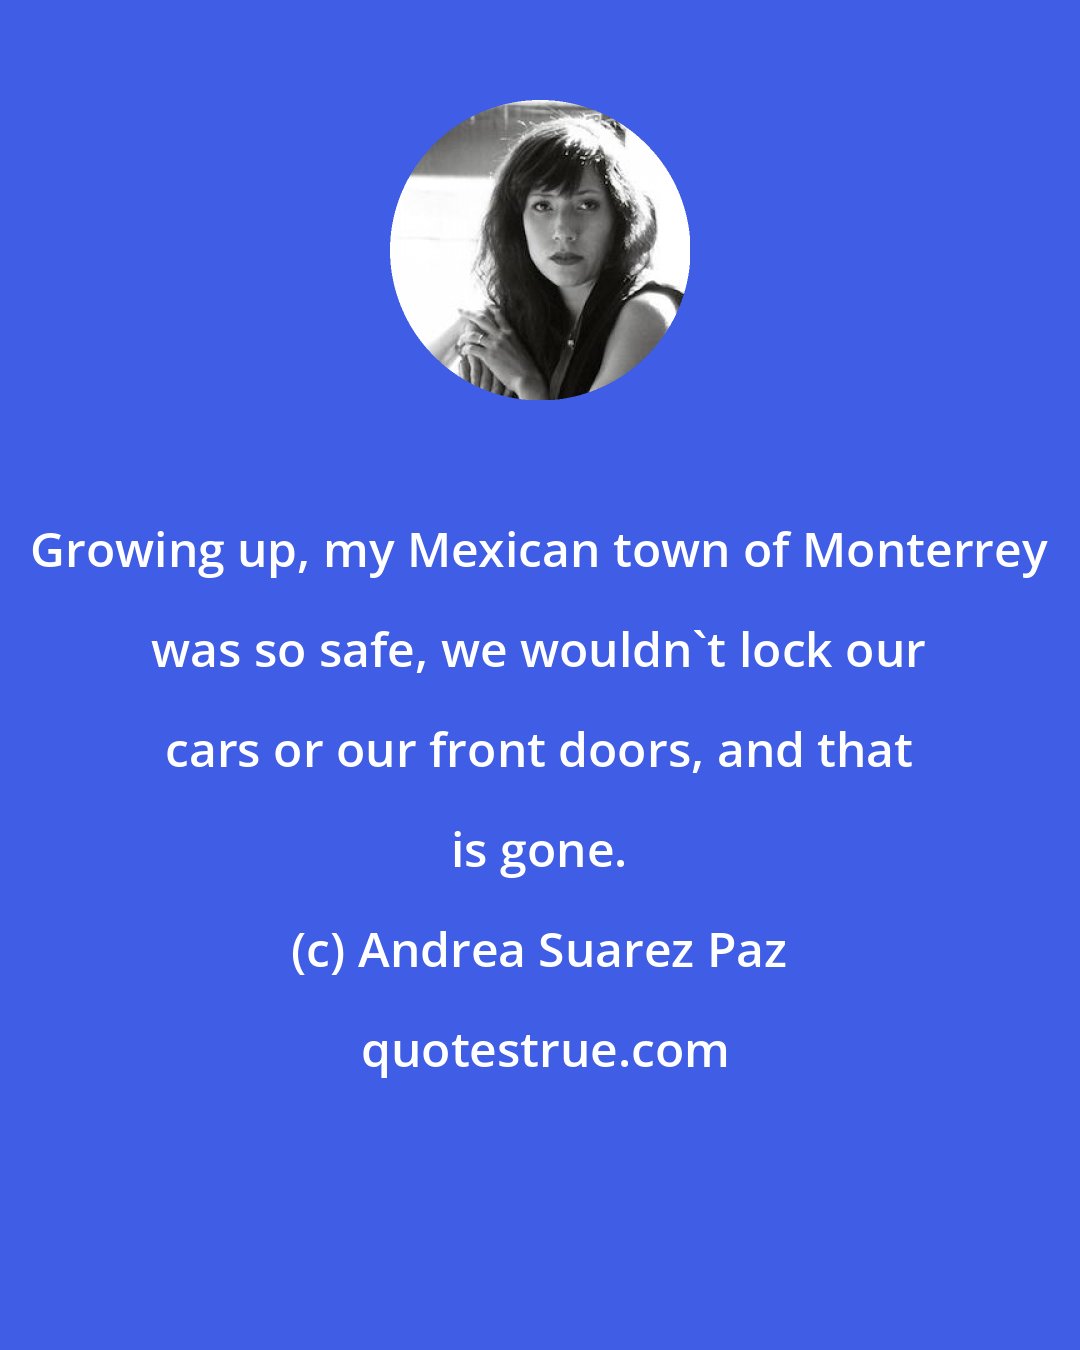 Andrea Suarez Paz: Growing up, my Mexican town of Monterrey was so safe, we wouldn't lock our cars or our front doors, and that is gone.